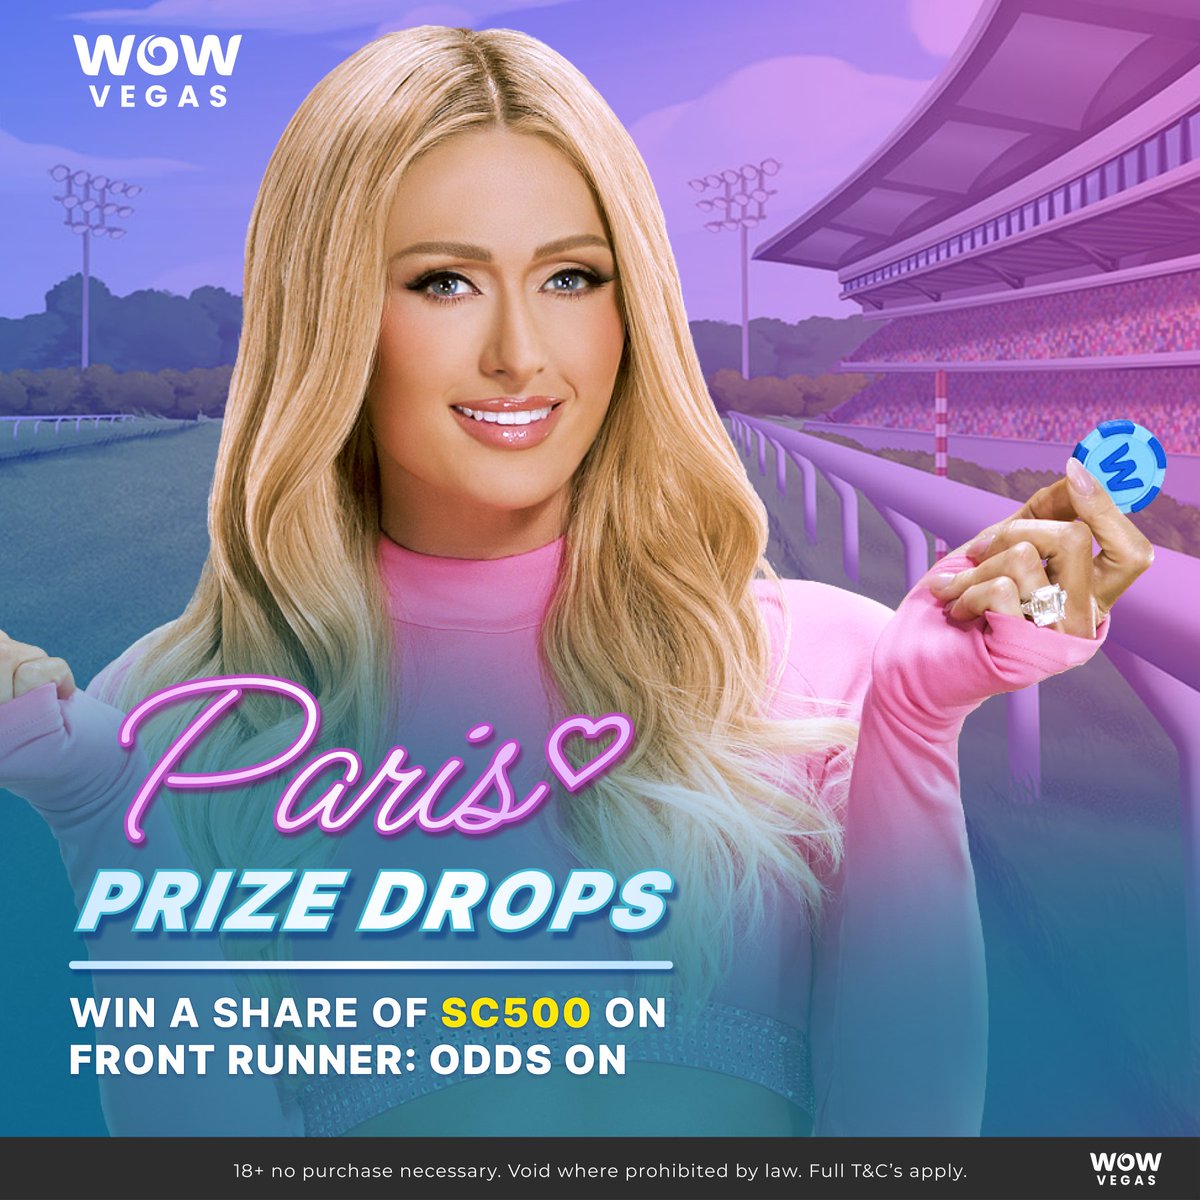 Today, we are pleased to announce another brand-new game release at WOW Vegas - Front Runner: Odds On! 🏇🎉 For today only, you can win a share of SC 500 with Paris Prize Drops with Front Runner! Simply play with SC before midnight tonight PT to be eligible! 🎁